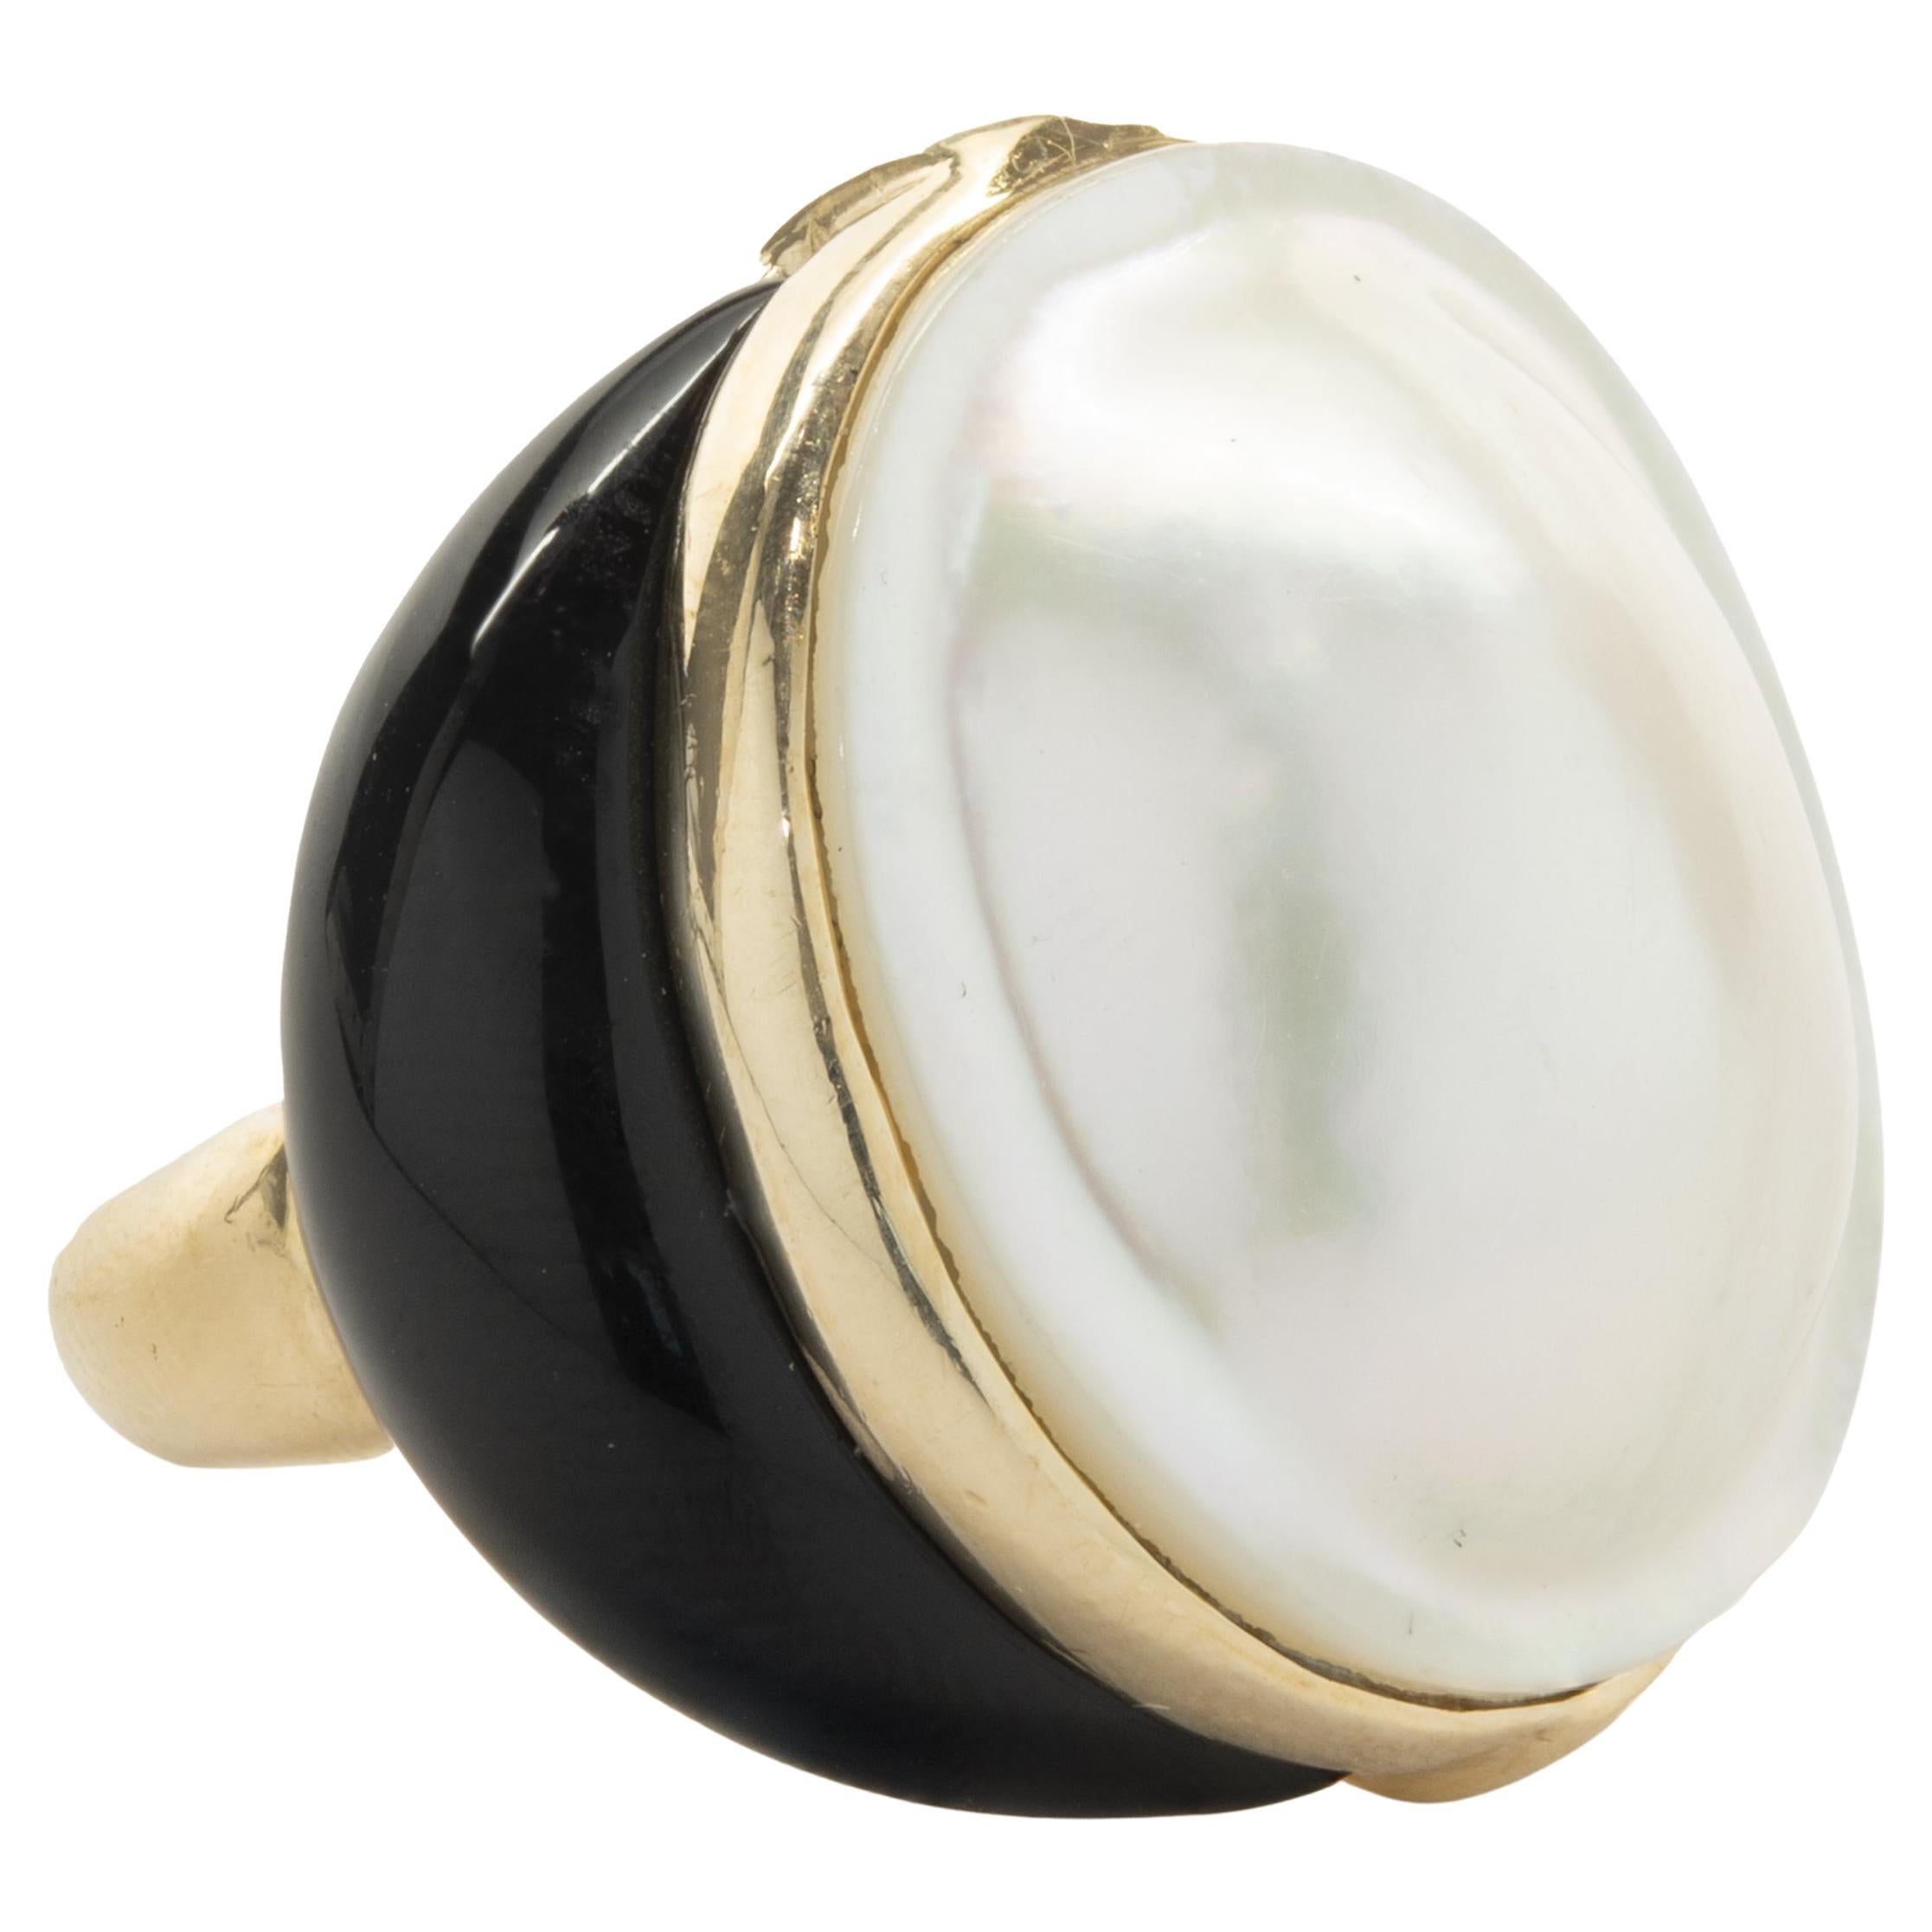 Designer: custom design
Material: 18k yellow gold
Mabe Pearl: 23 x 19.50mm
Ring Size: 6.25 (please allow two additional shipping days for sizing requests)
Dimensions: ring top measures 25.70mm
Weight: 18.22 grams
